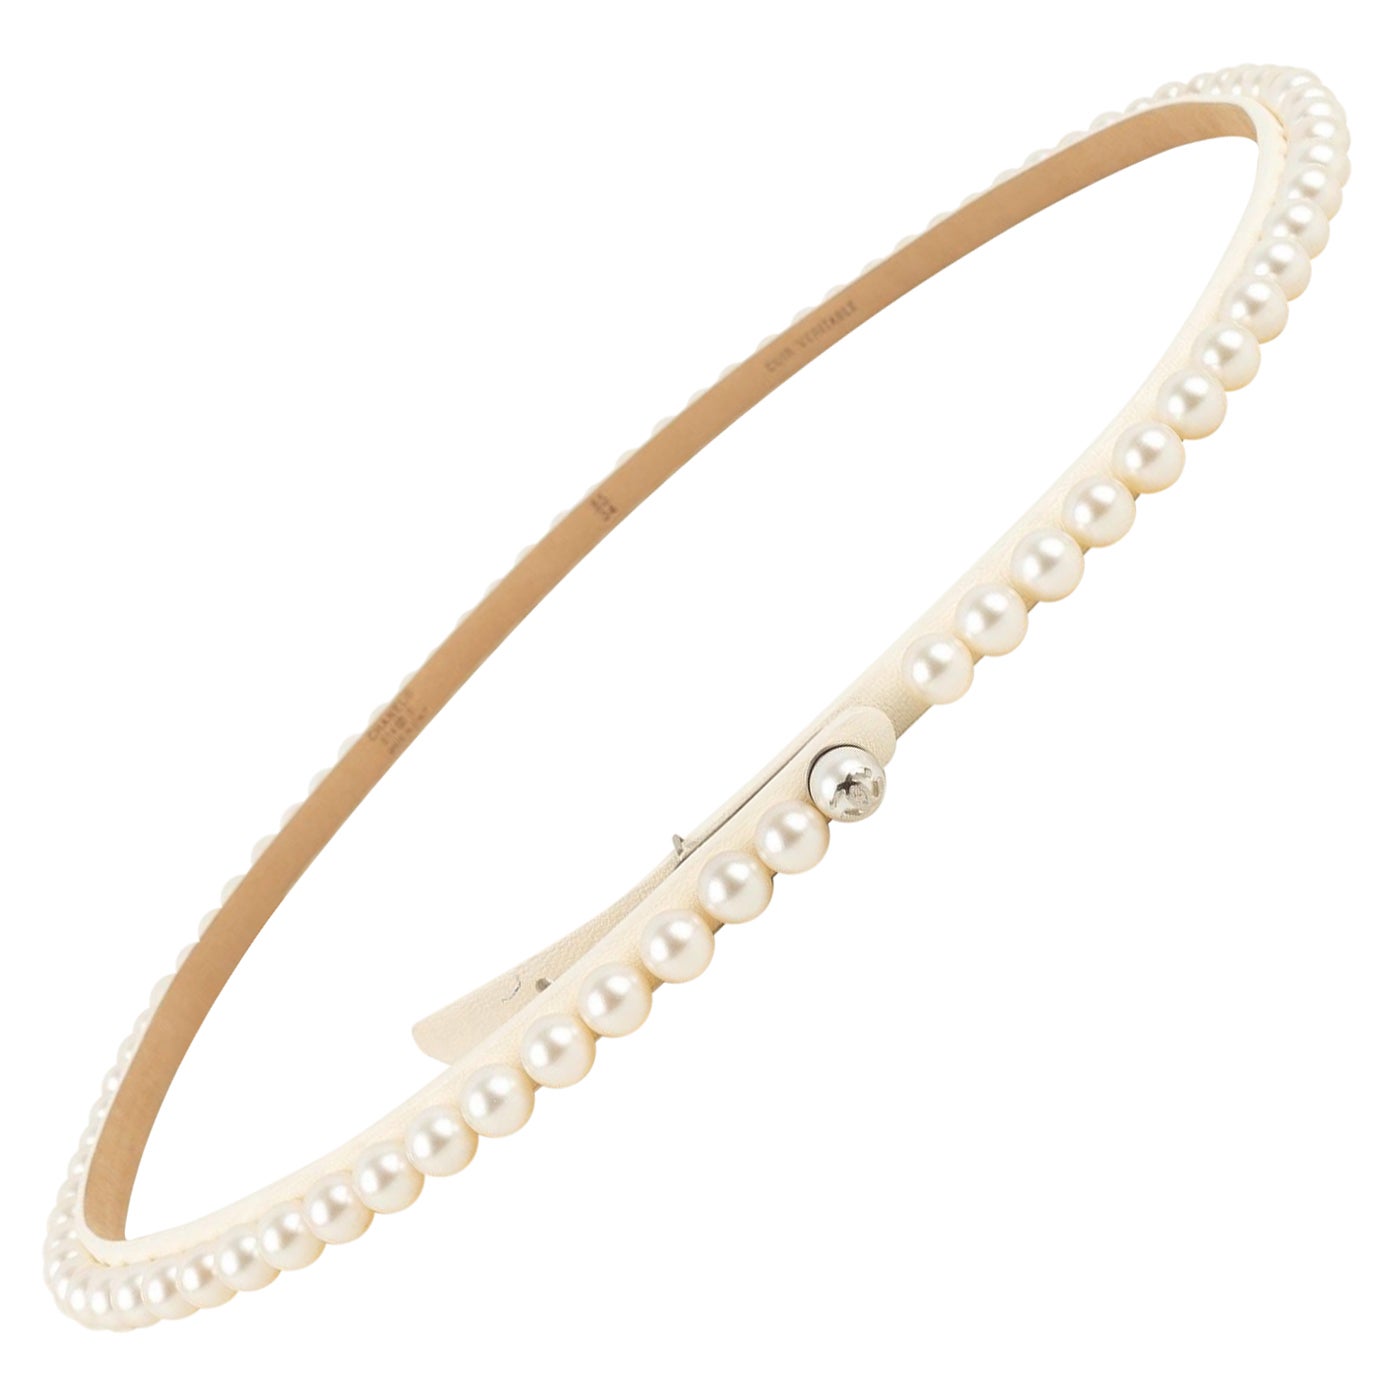 Chanel Belt in Leather and Costume Pearly Beads, 2014 For Sale